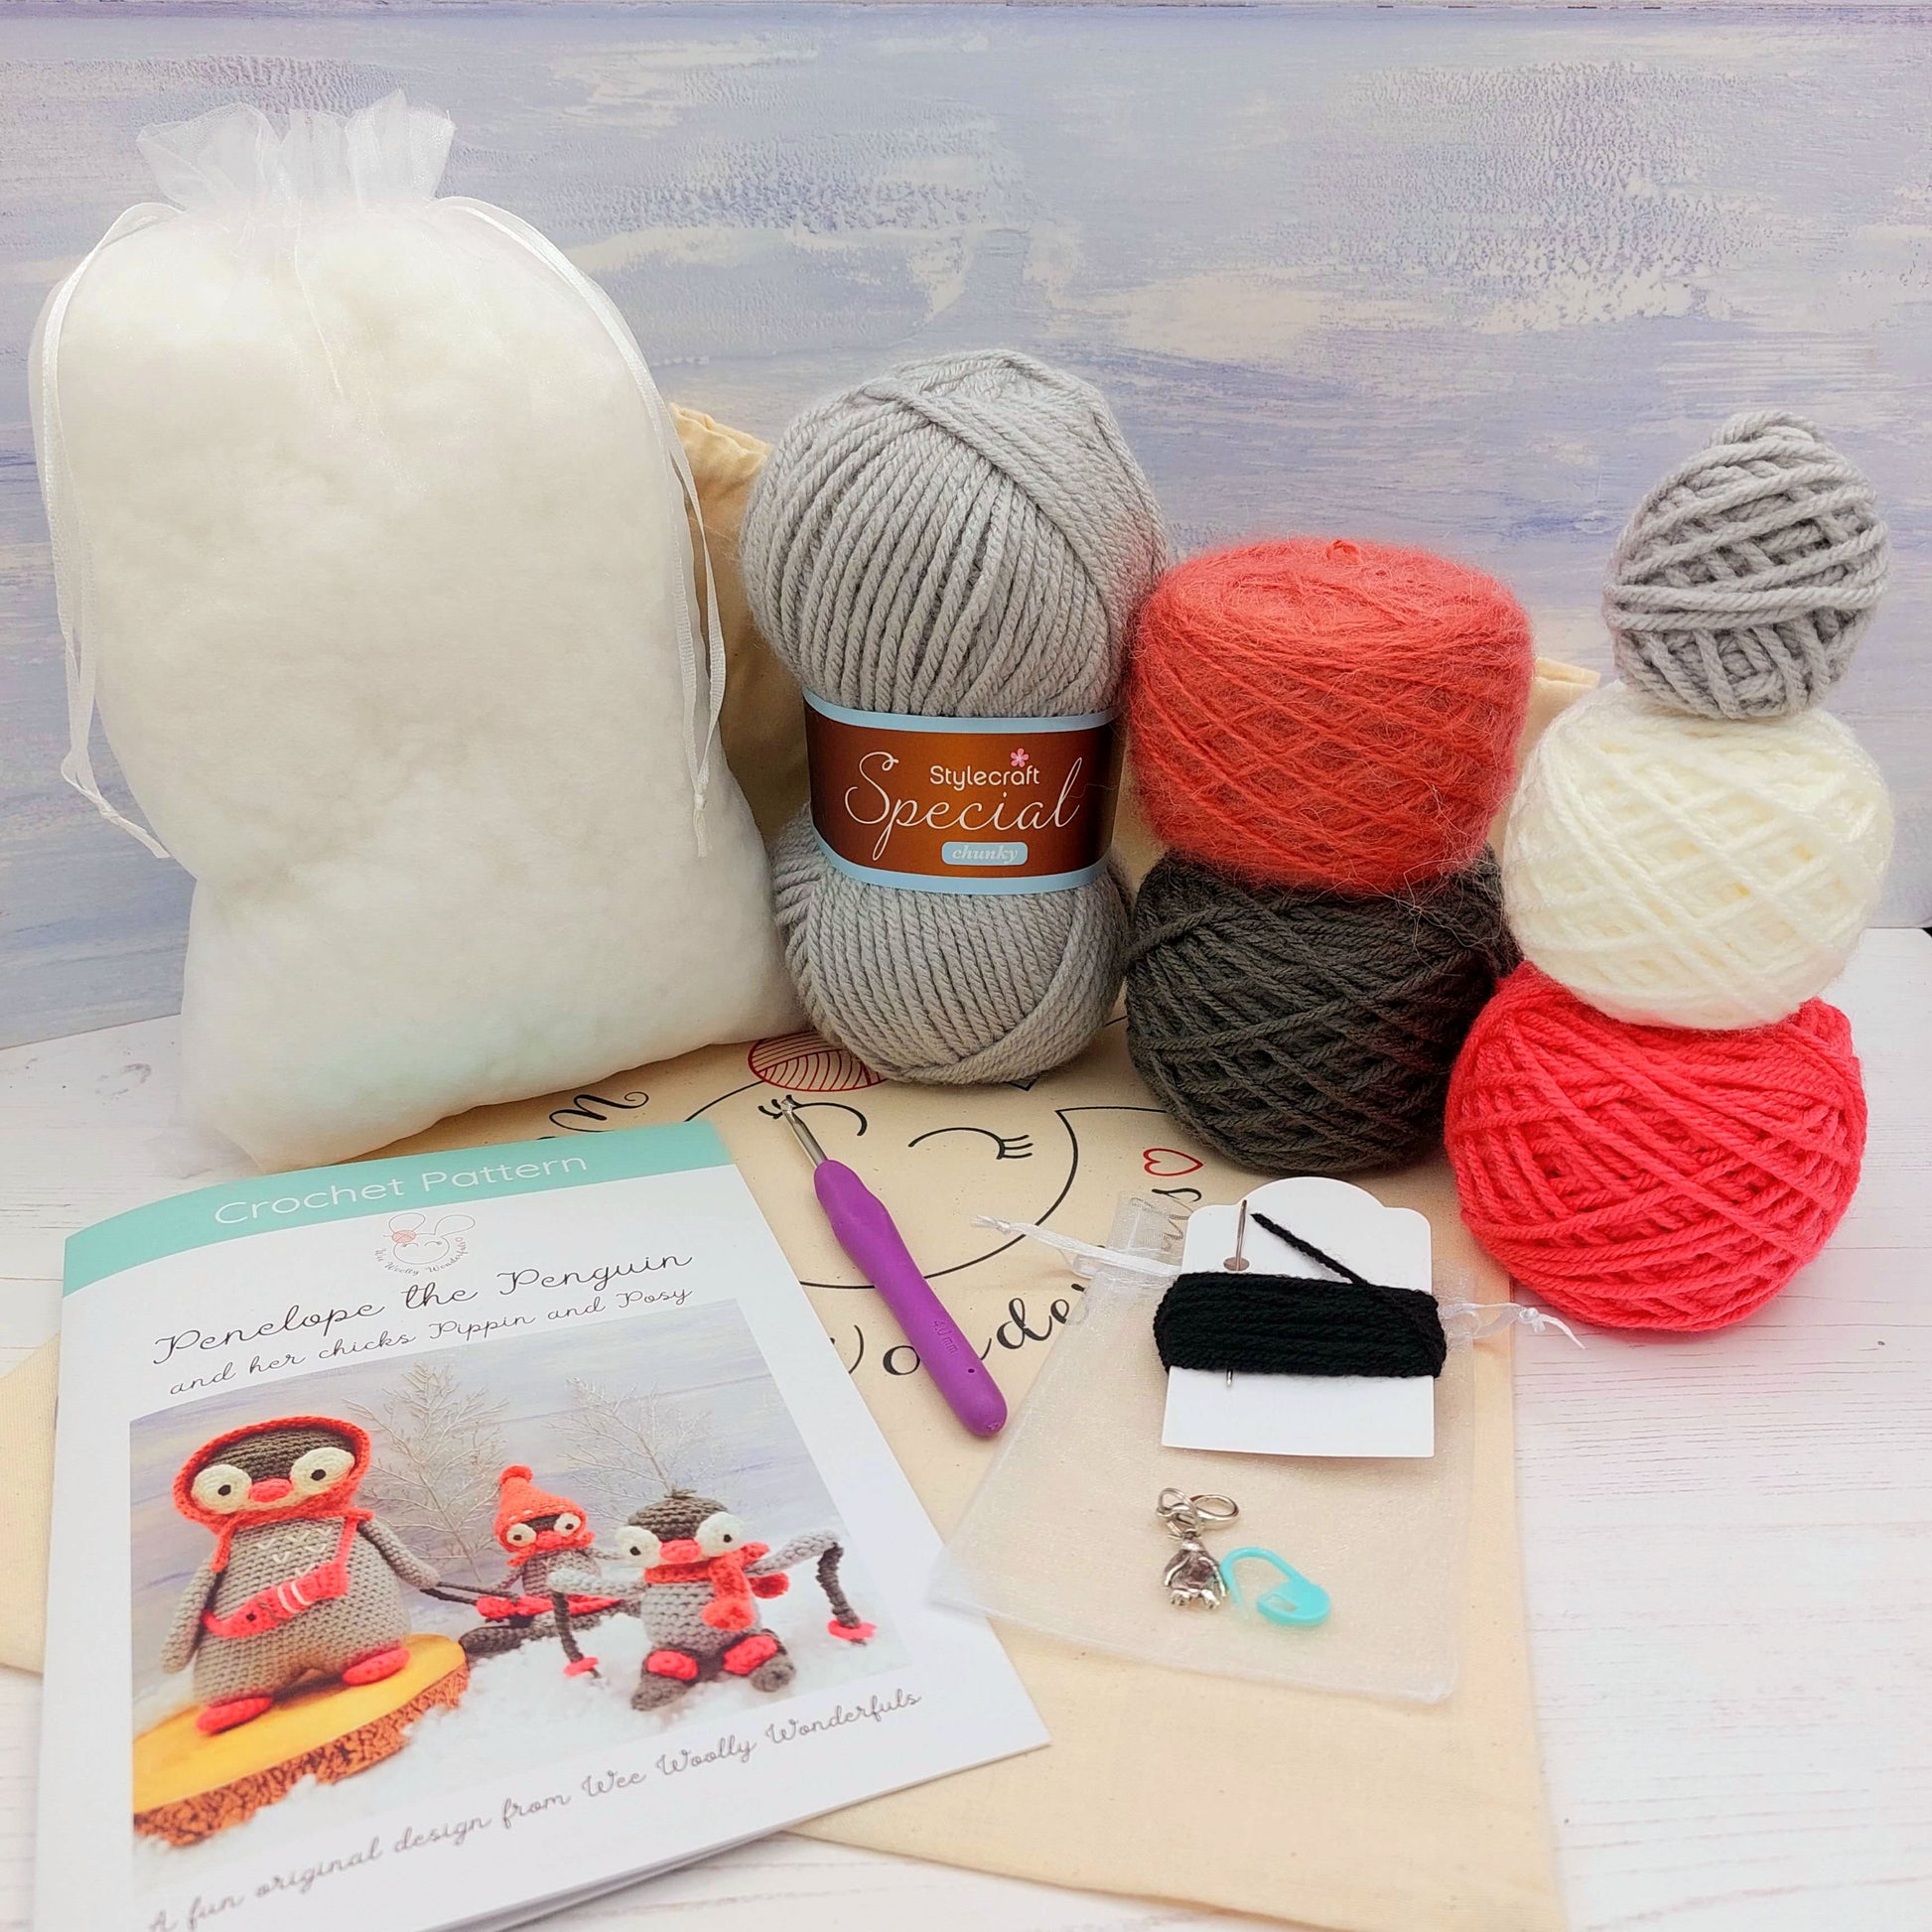 Contents of Penguin Crochet KIt - wool, pattern, stuffing, project bag and stitch markers